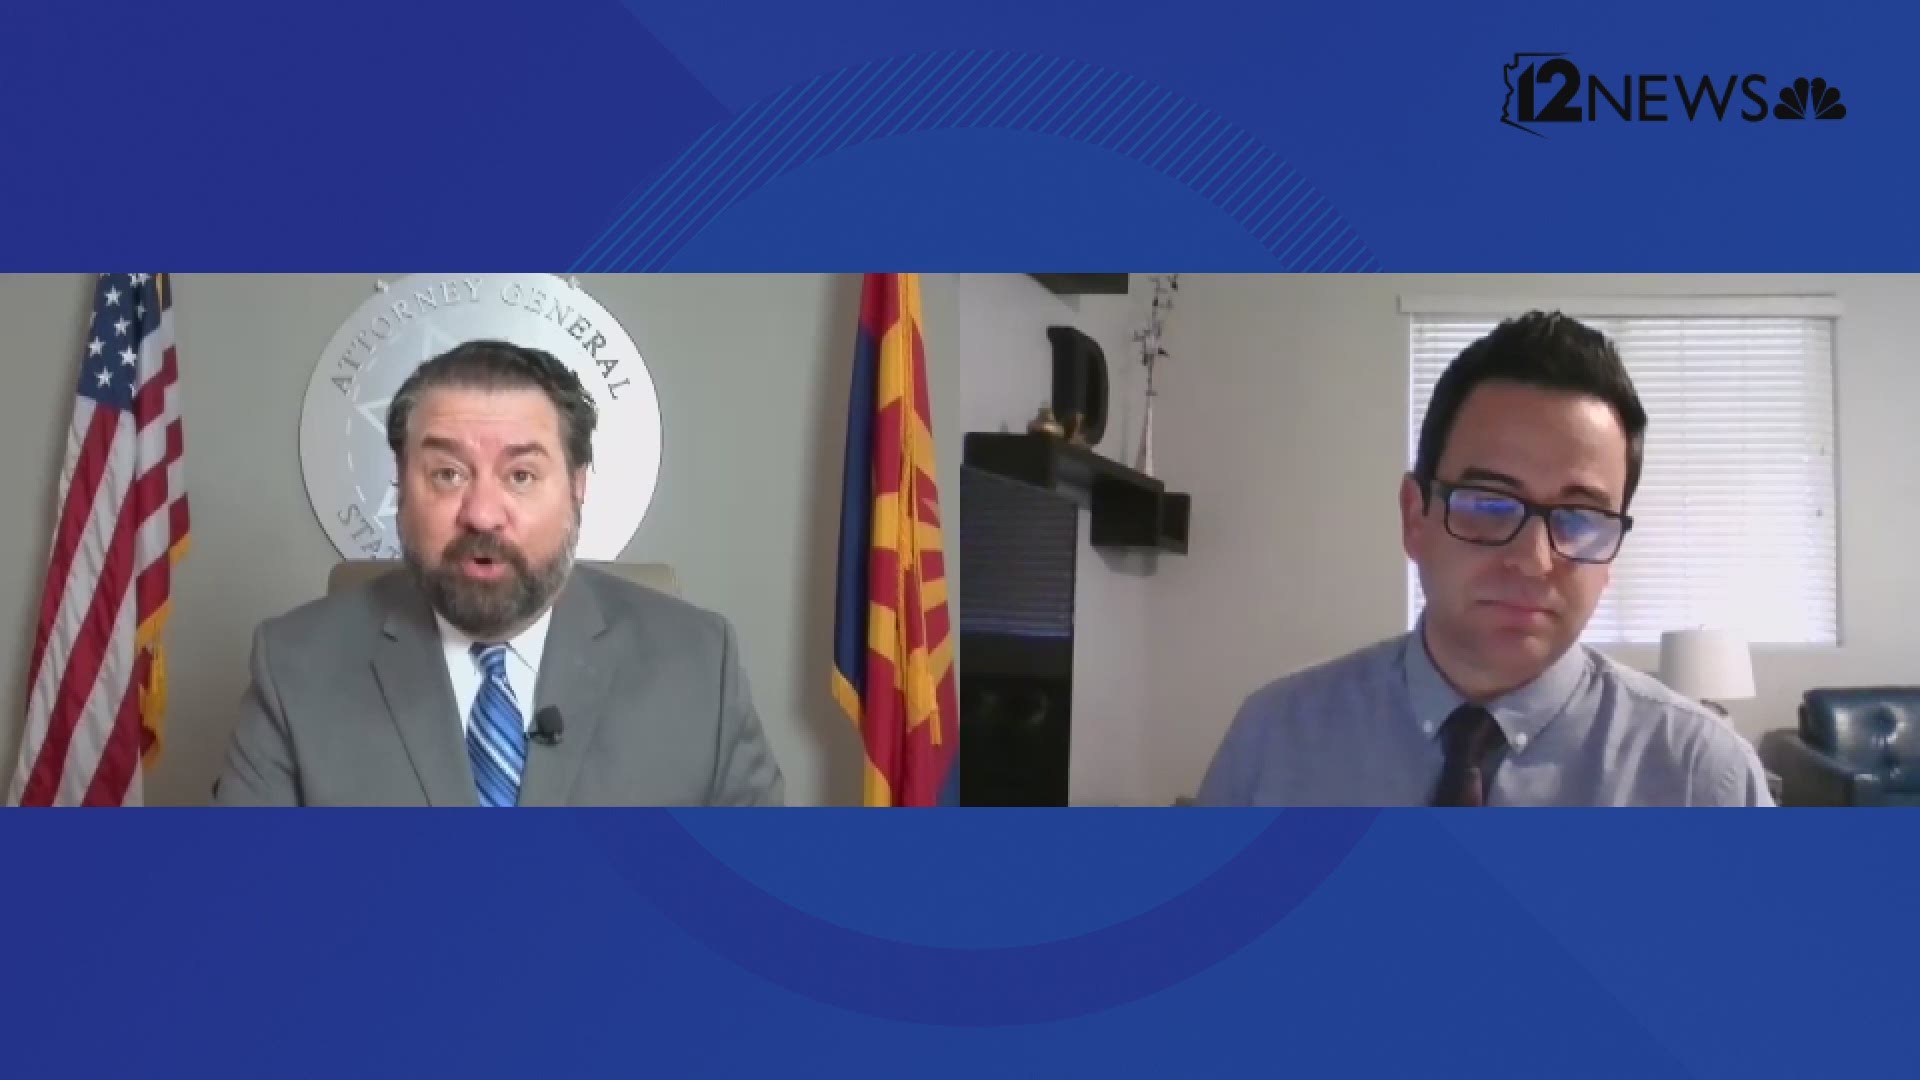 Arizona Attorney General Mark Brnovich told 12 News he has no evidence there are attempts to disenfranchise voters.